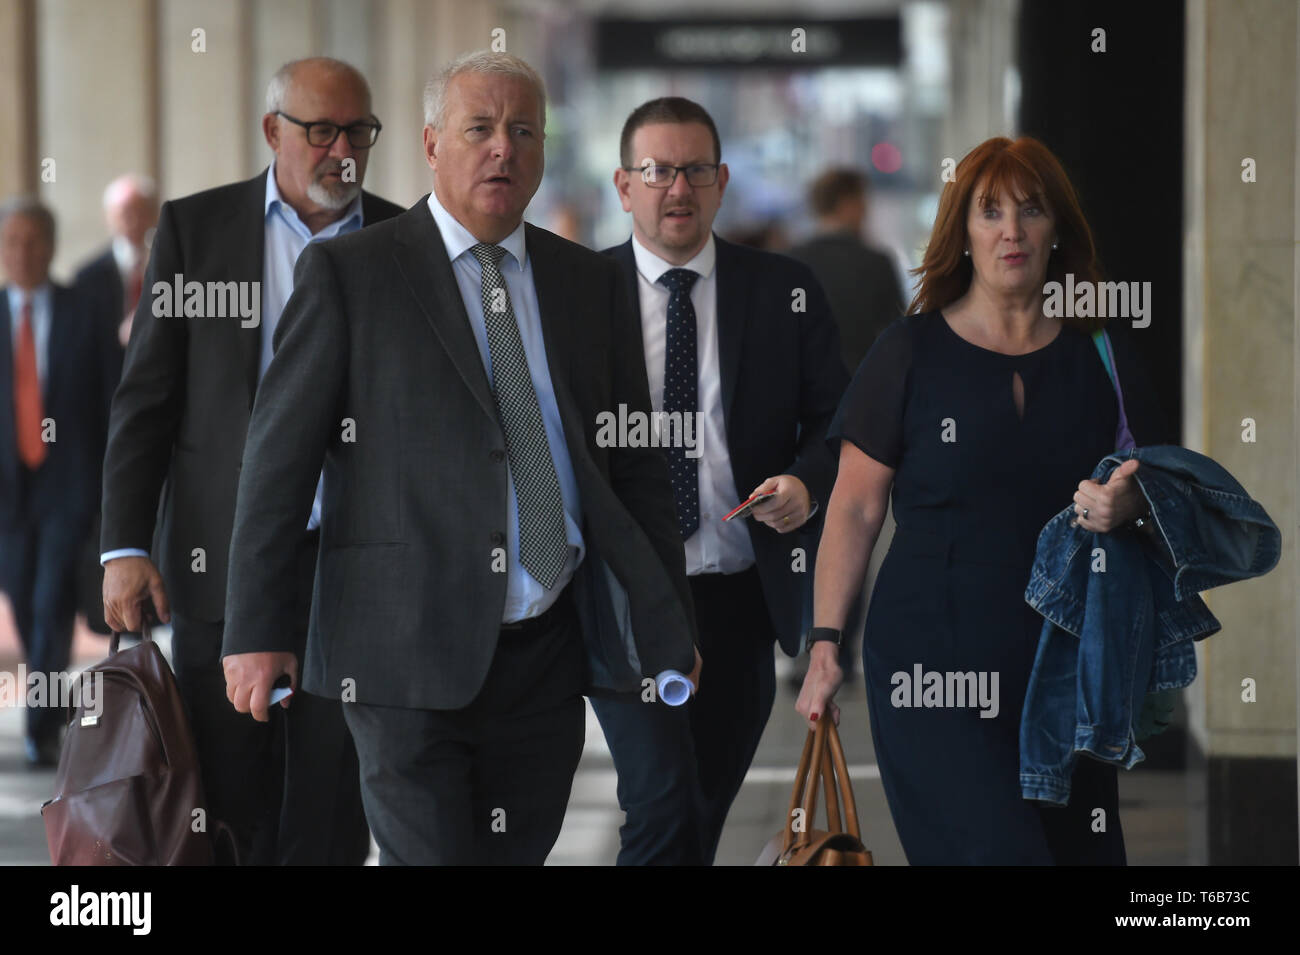 Labour NEC members arrive including Jon Trickett (left), Ian Lavery (centre left) and Andrew Gwynne (centre) for an NEC meeting in London as the Labour Party's governing body gathers to agree its draft European elections manifesto. Stock Photo